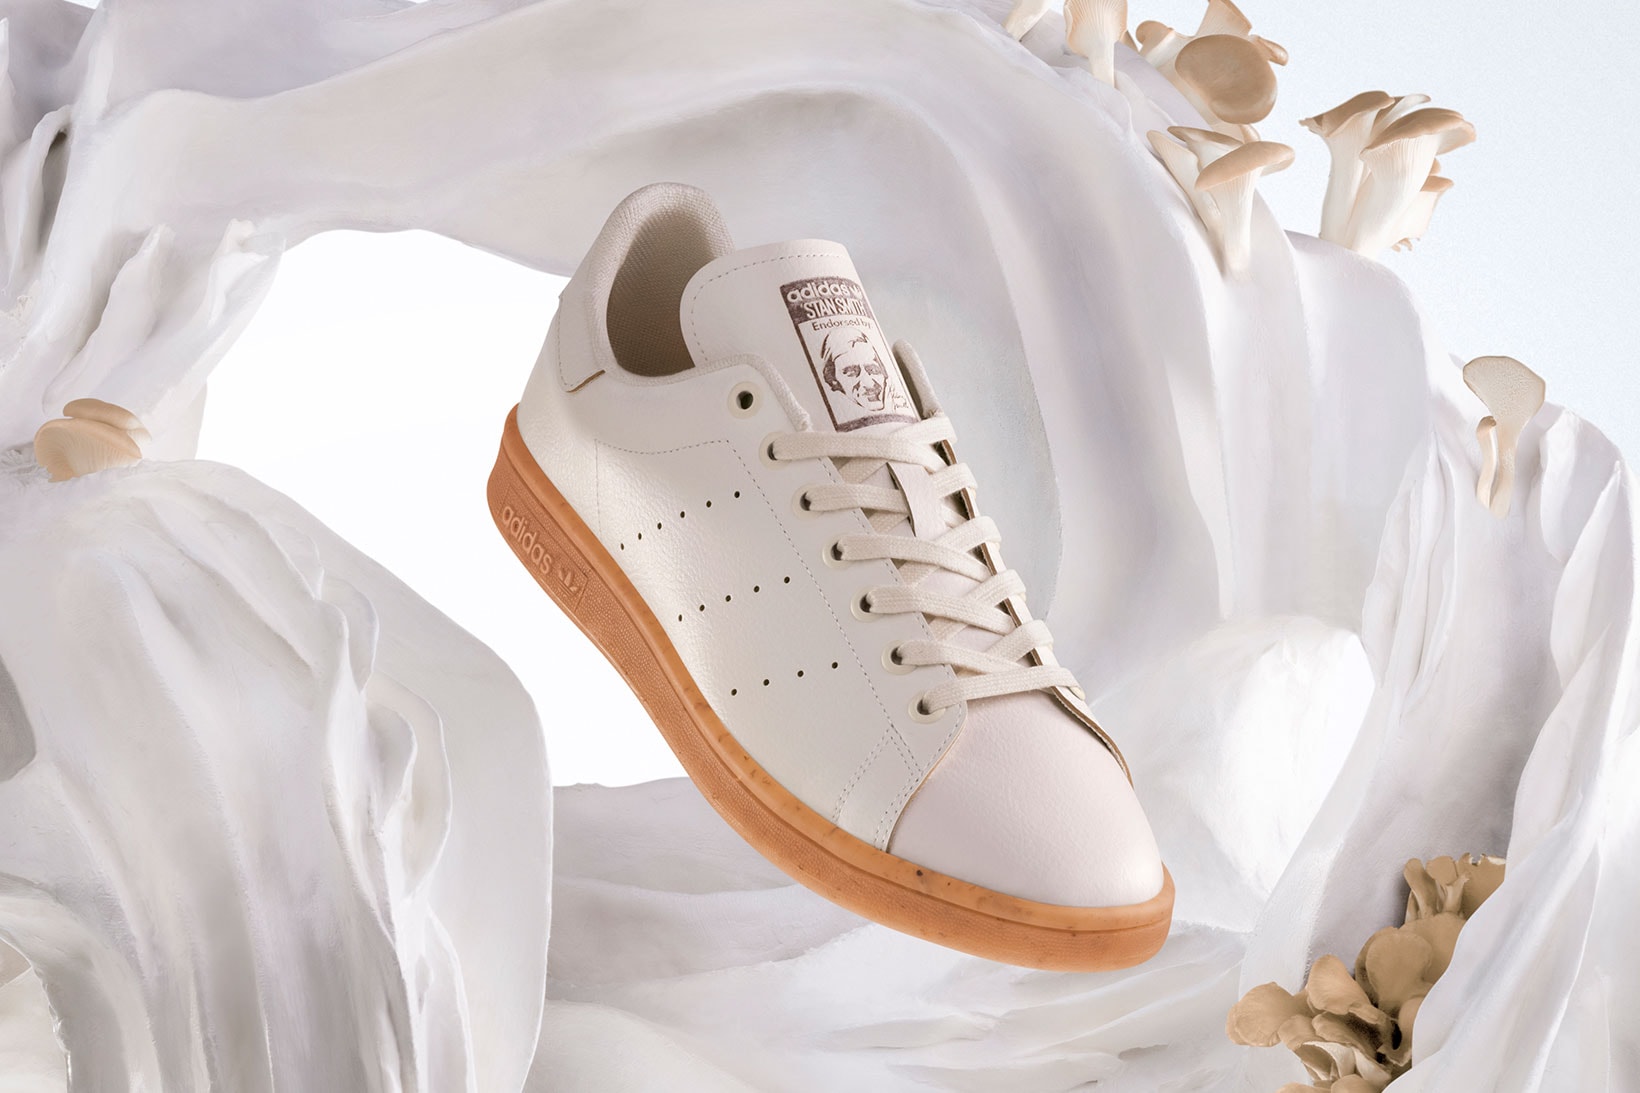 adidas stan smith mylo mushroom leather sneakers concept shoe